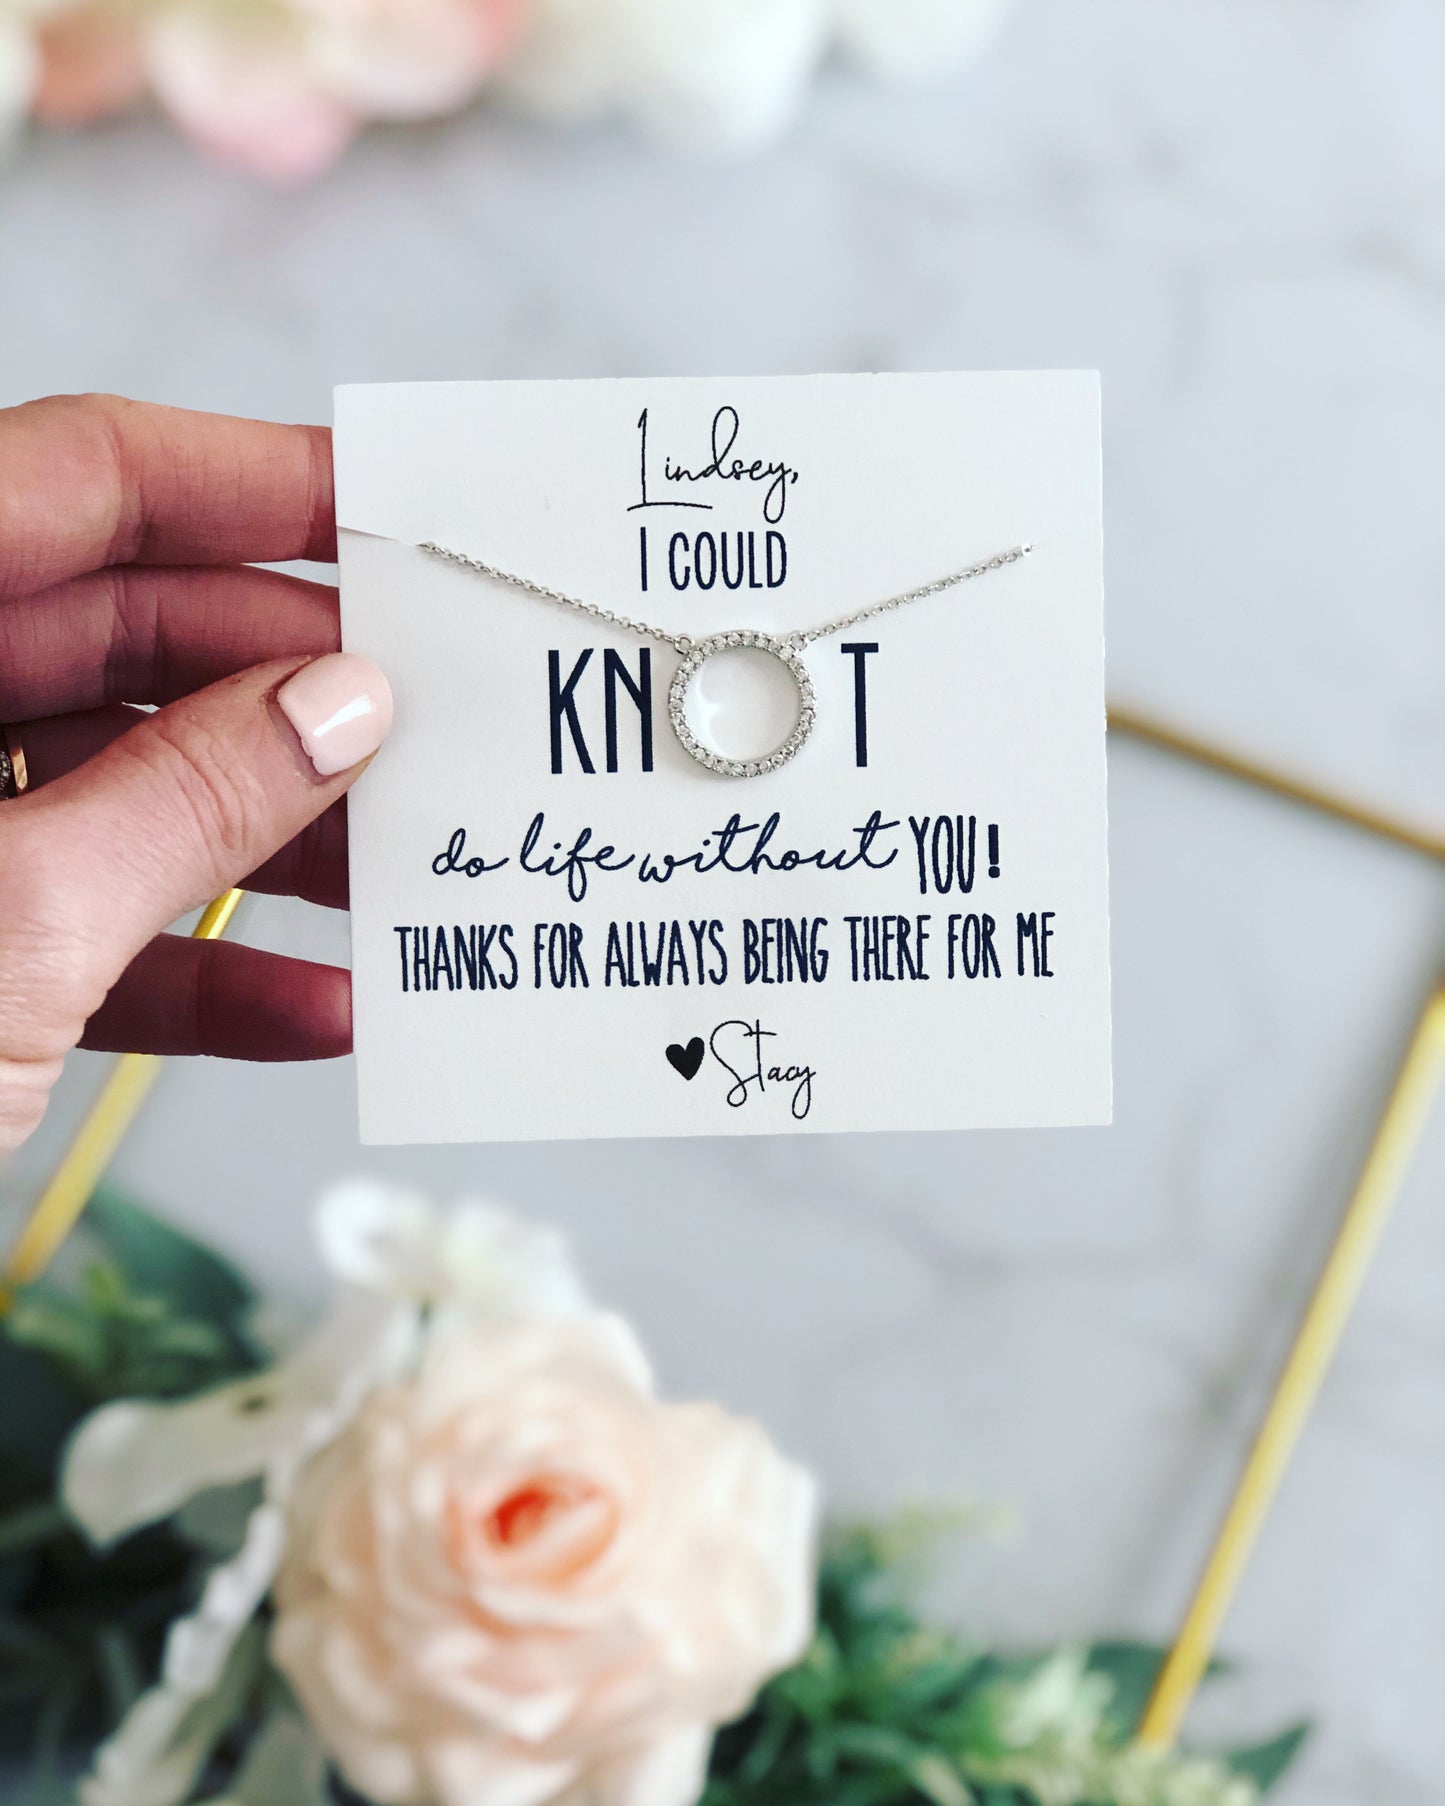 Could KNOT Do Life Without You Necklace